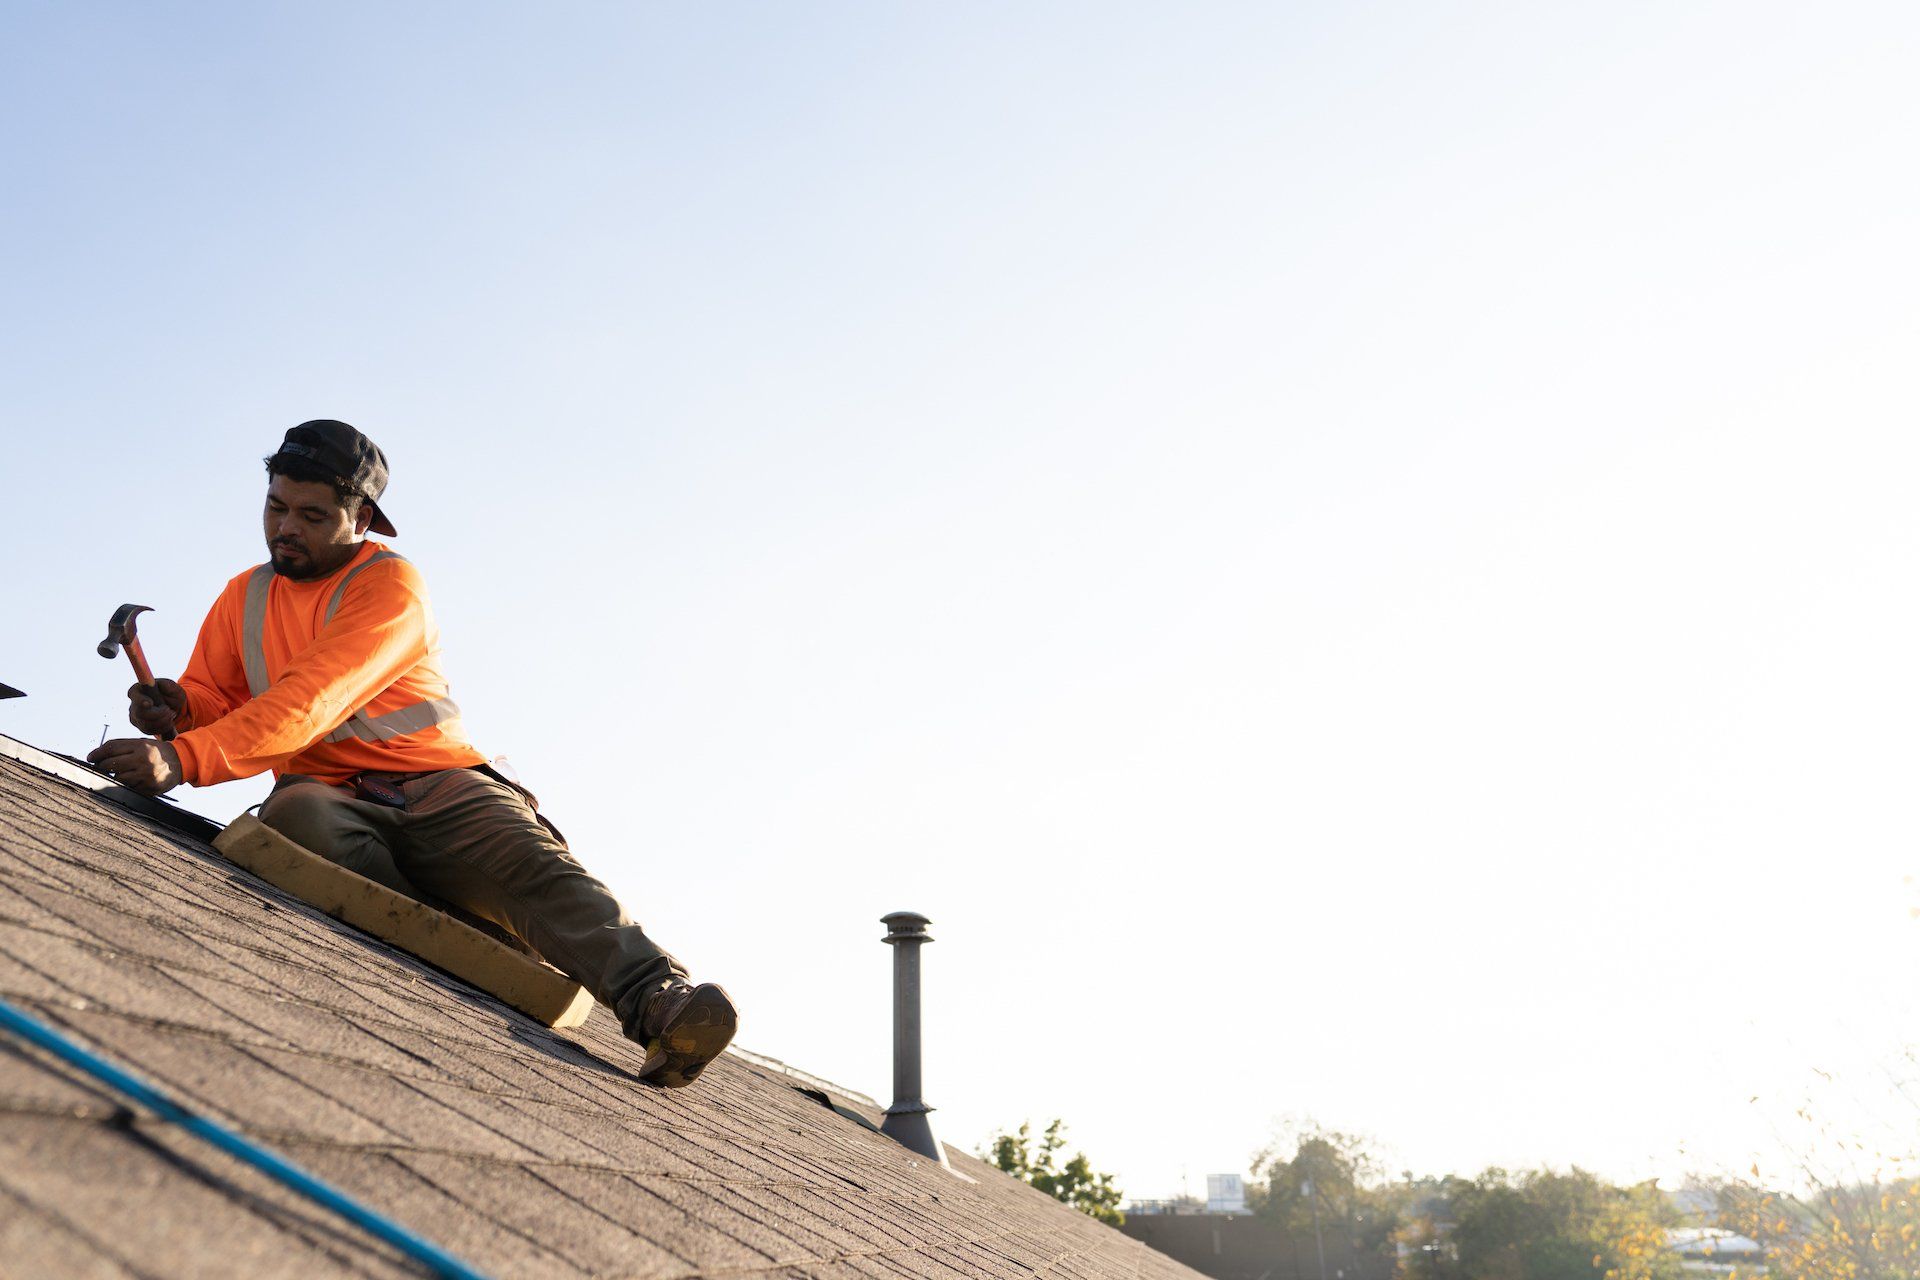 Birdcreek Roofing - Simple, Fast, and Reliable Roof Replacement